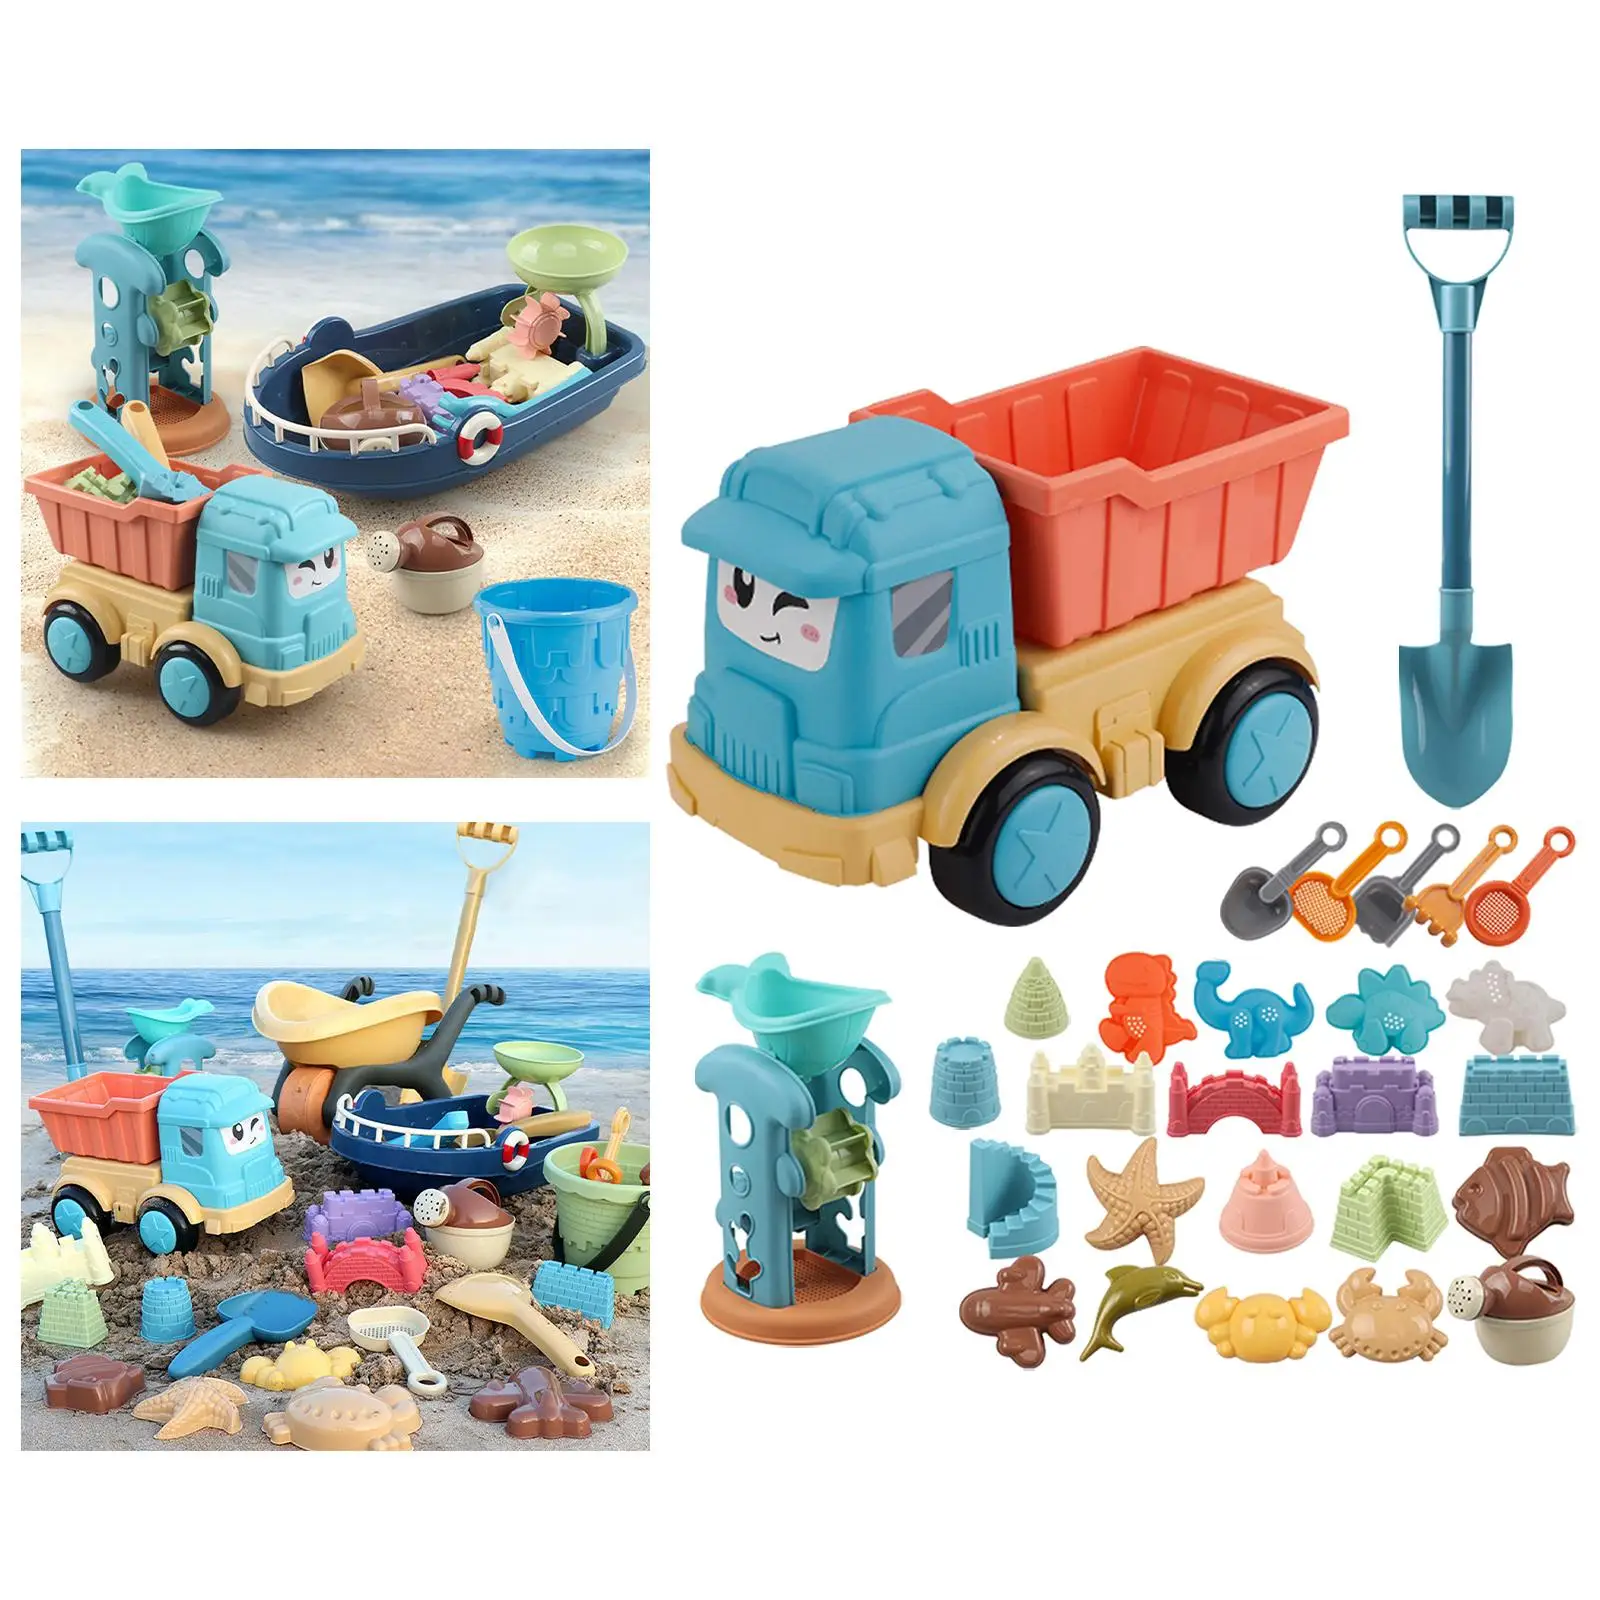 28 Beach Fun for Games Activity Baby Toddler Birthday Gifts 